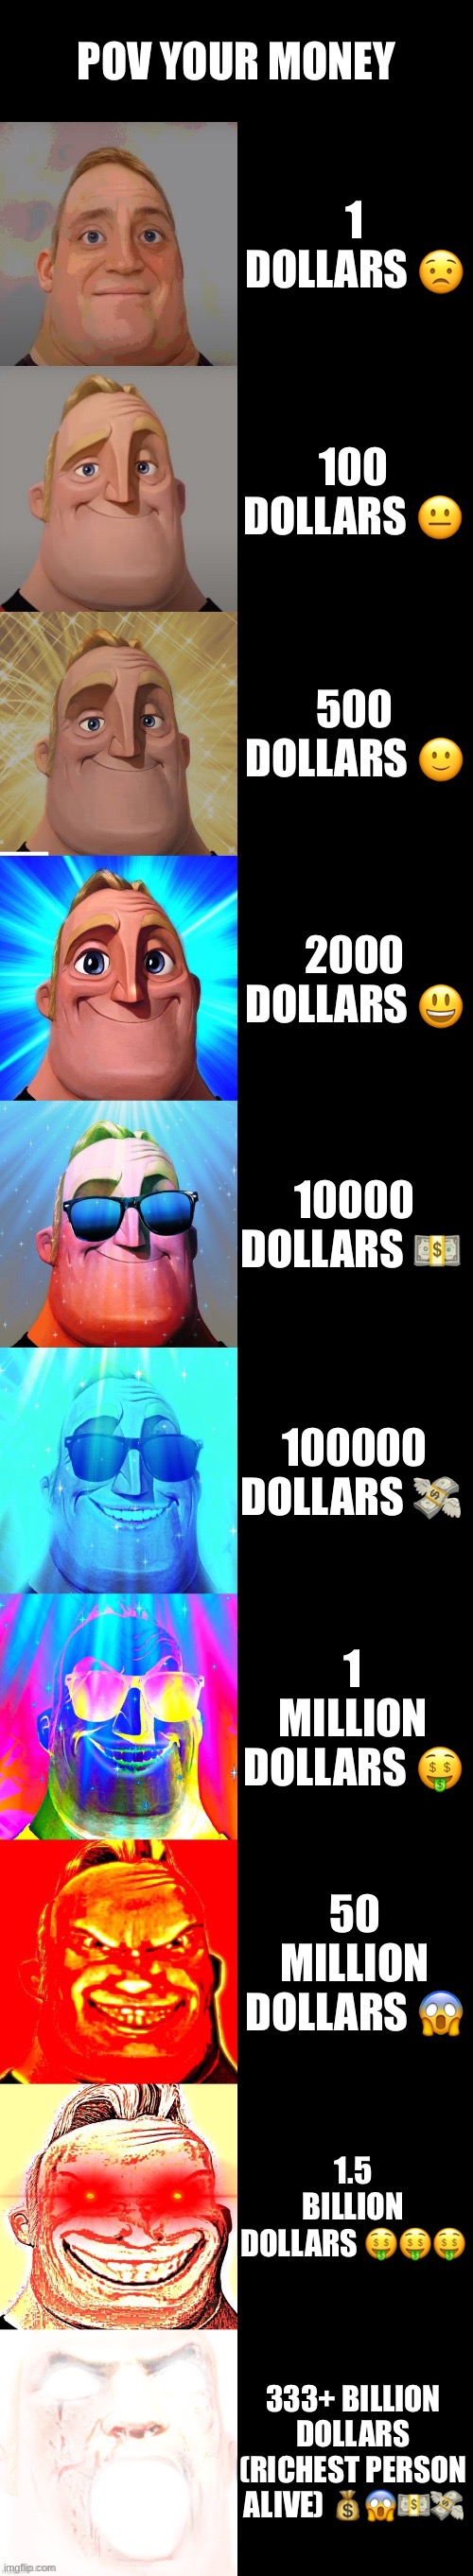 Mr incredible becoming canny | POV YOUR MONEY; 1 DOLLARS 😟; 100 DOLLARS 😐; 500 DOLLARS 🙂; 2000 DOLLARS 😃; 10000 DOLLARS 💵; 100000 DOLLARS 💸; 1 MILLION DOLLARS 🤑; 50 MILLION DOLLARS 😱; 1.5 BILLION DOLLARS 🤑🤑🤑; 333+ BILLION DOLLARS (RICHEST PERSON ALIVE) 💰😱💵💸 | image tagged in mr incredible becoming canny | made w/ Imgflip meme maker